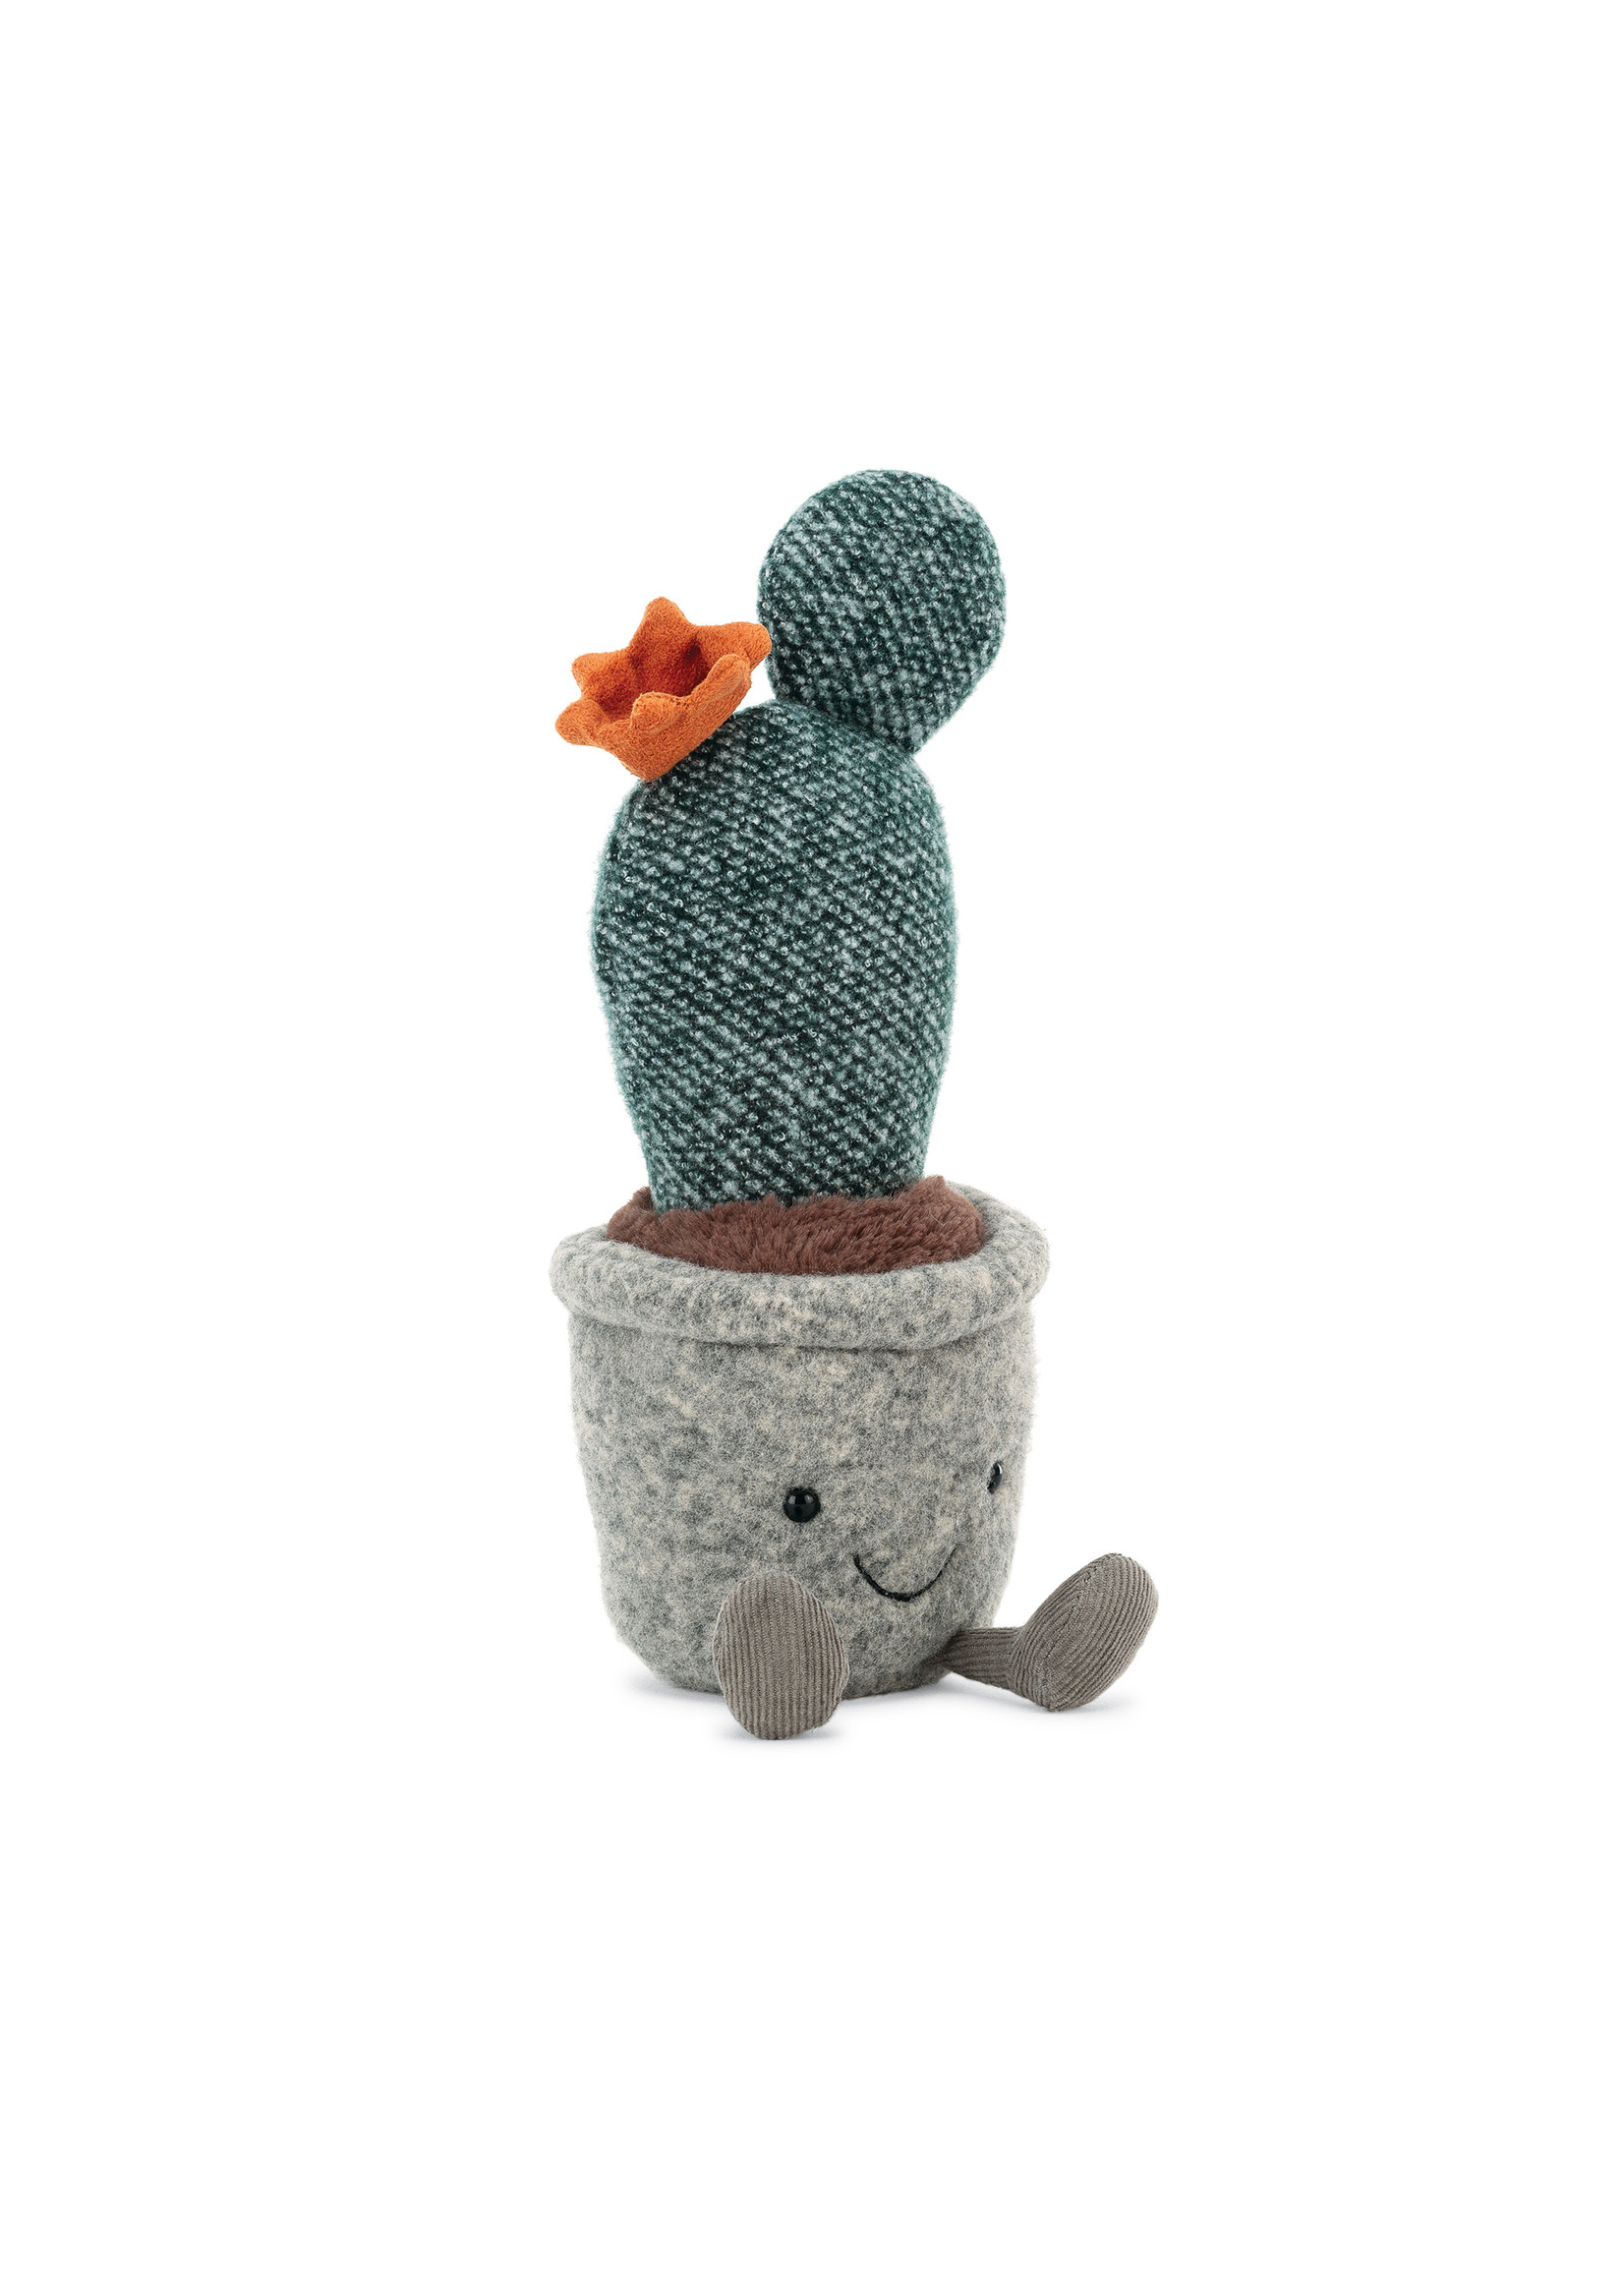 Jellycat Silly Succulent Prickly Pear Cactus